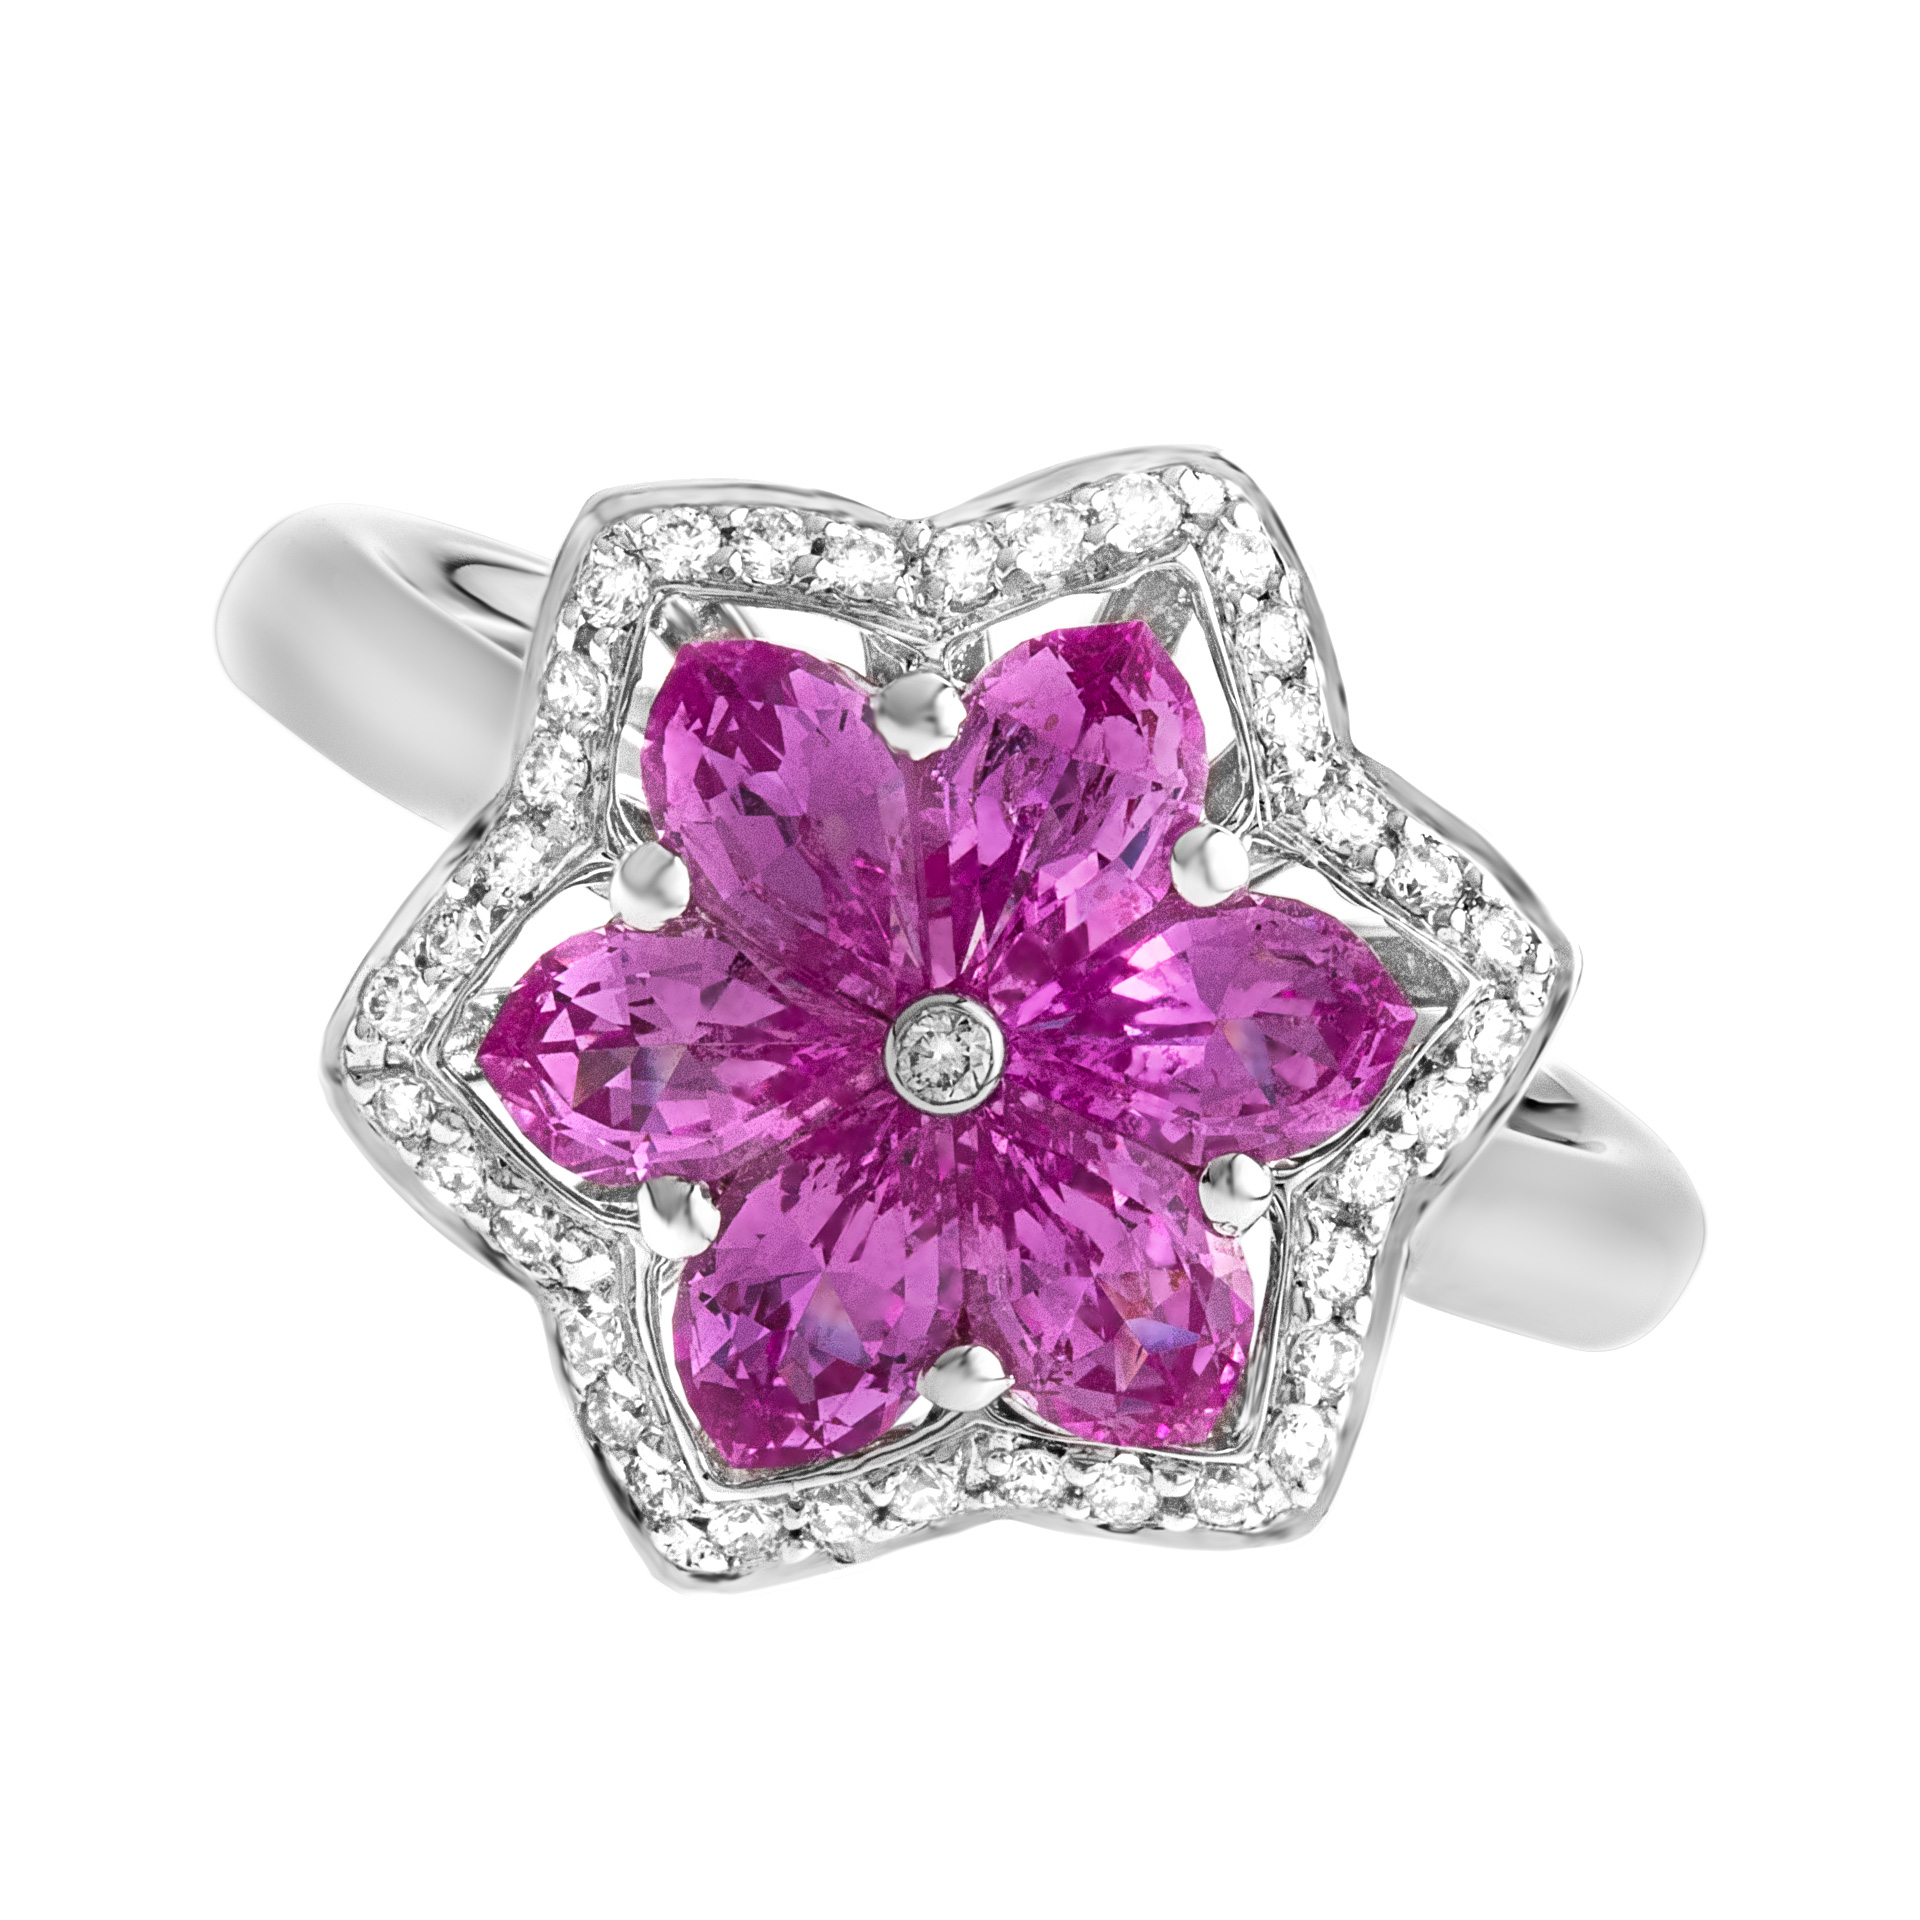 Pink sapphire ring with 1.85 cts in pink sapphires 0.18 cts in diamonds in 18k wg